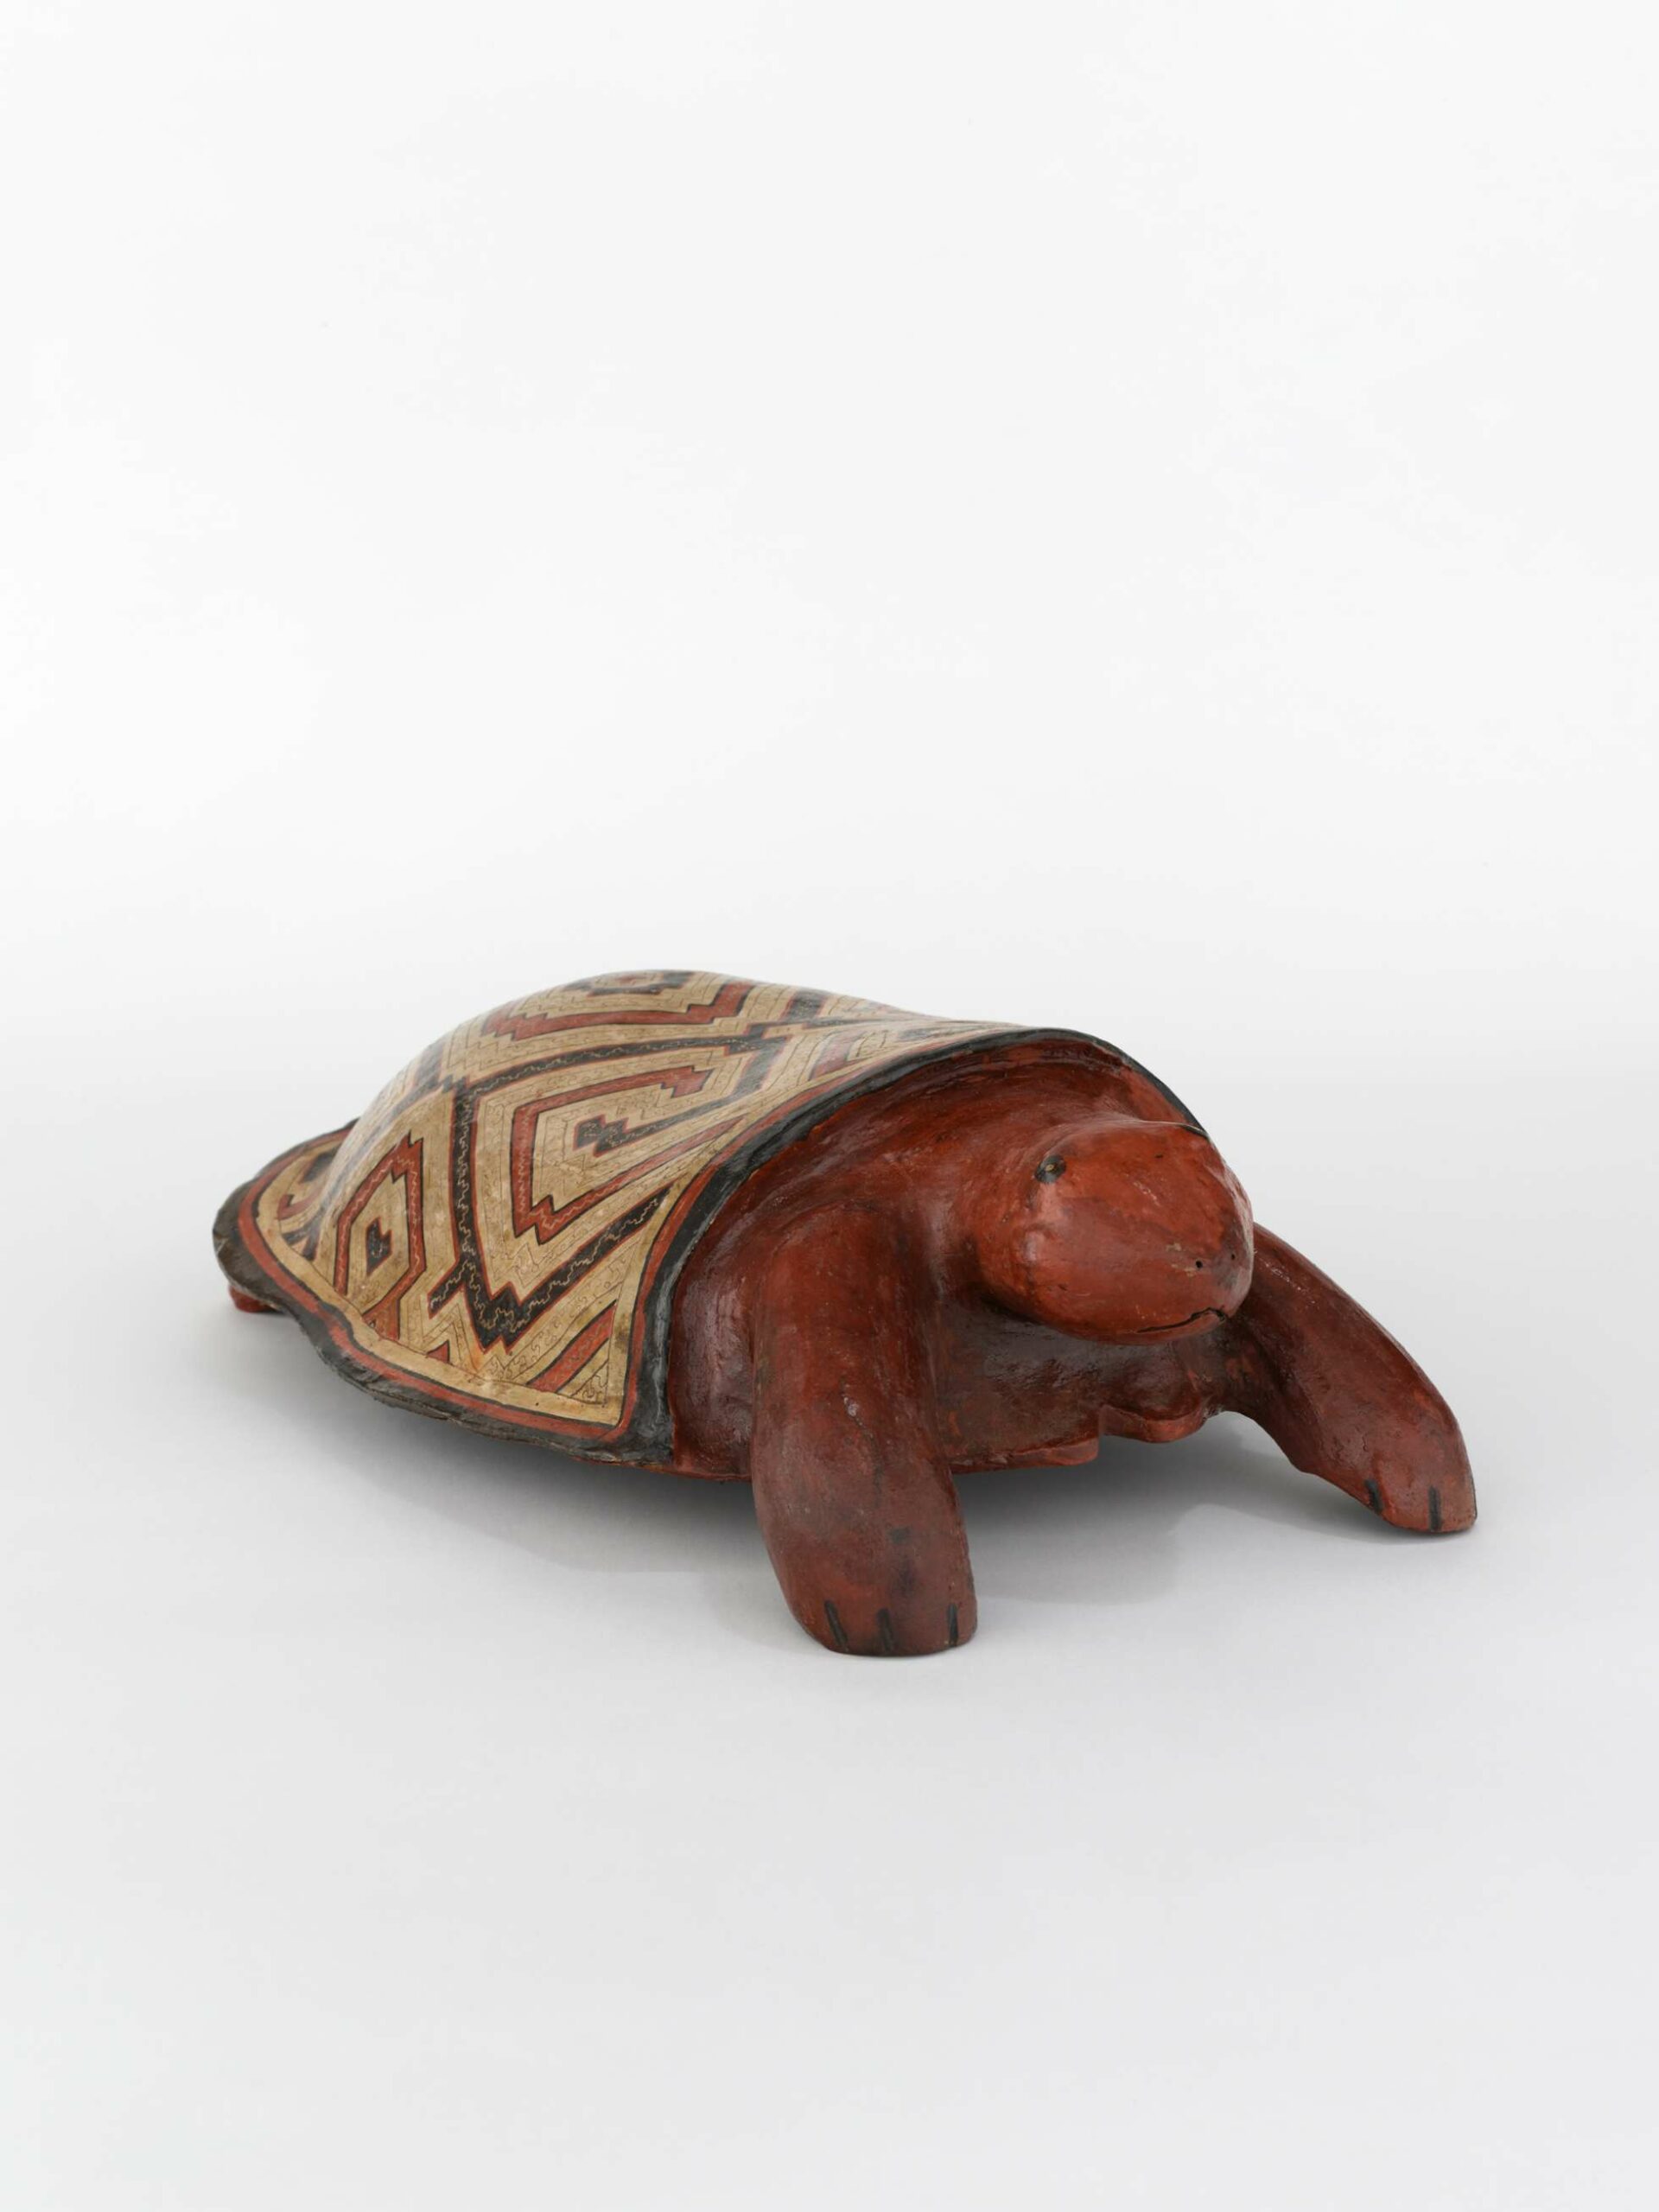 A ceramic sculpture of a turtle covered in orange-red resin. Its shell is beige colored and etched with black and terracotta geometric patterns.